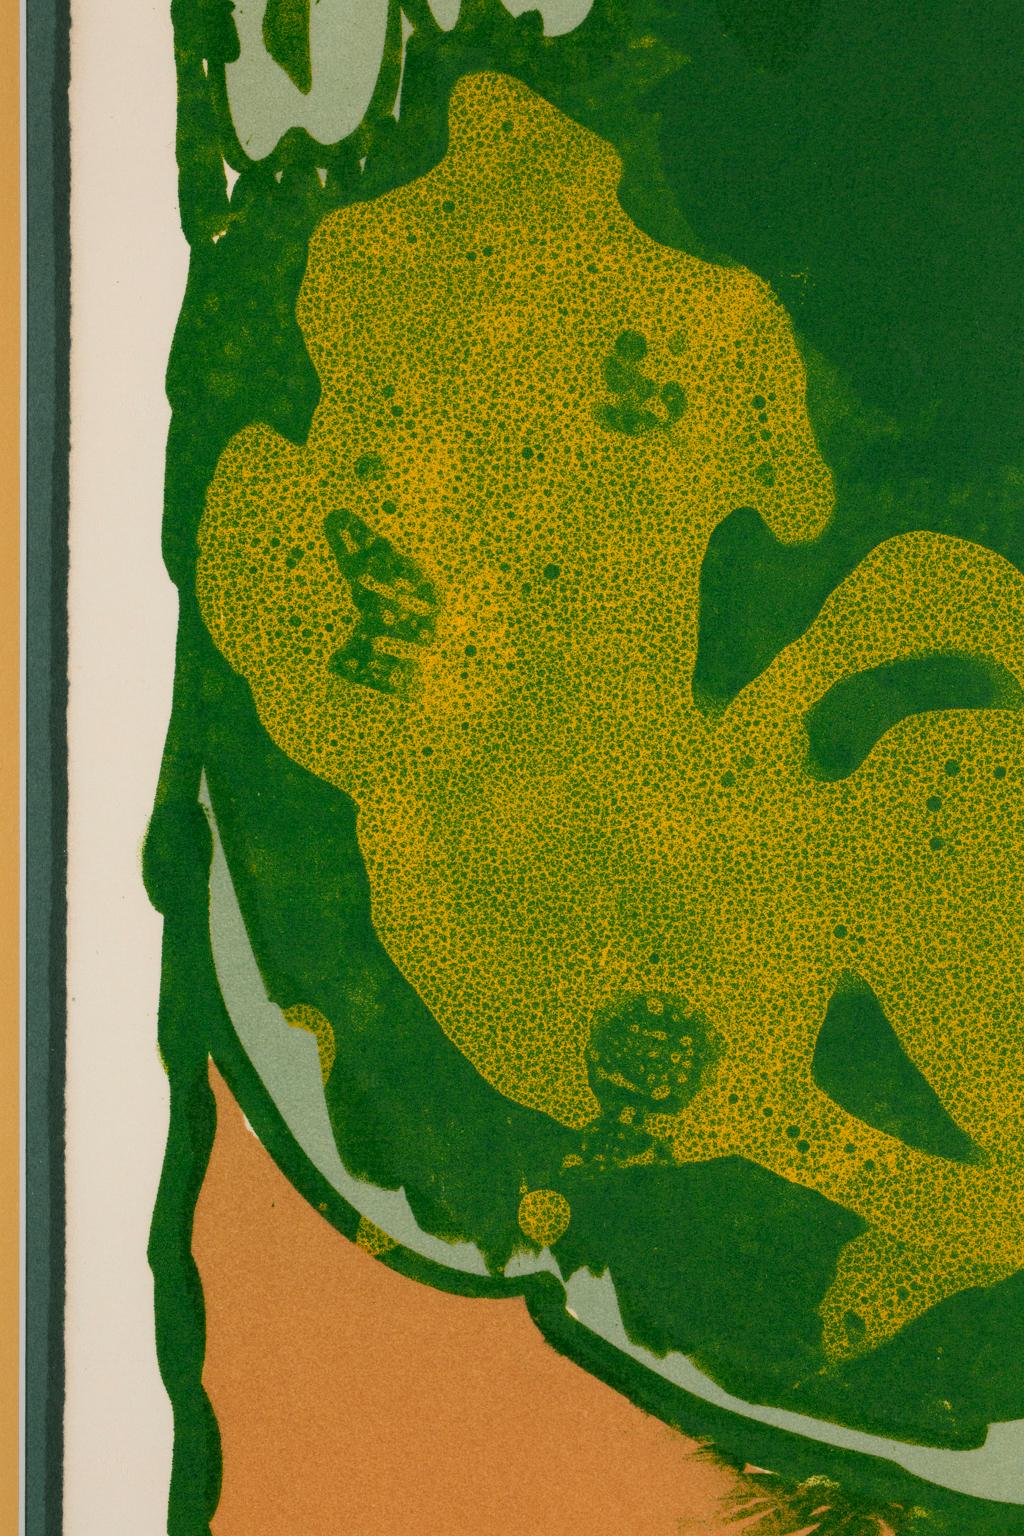 SALE ONE WEEK ONLY

“Untitled Landscape” is a serigraph in various shades of green and orange. Although it has an Art Nouveau feel to it, it can be described as Lyrical Abstraction. He was born in Belgian, but has lived and worked in France since